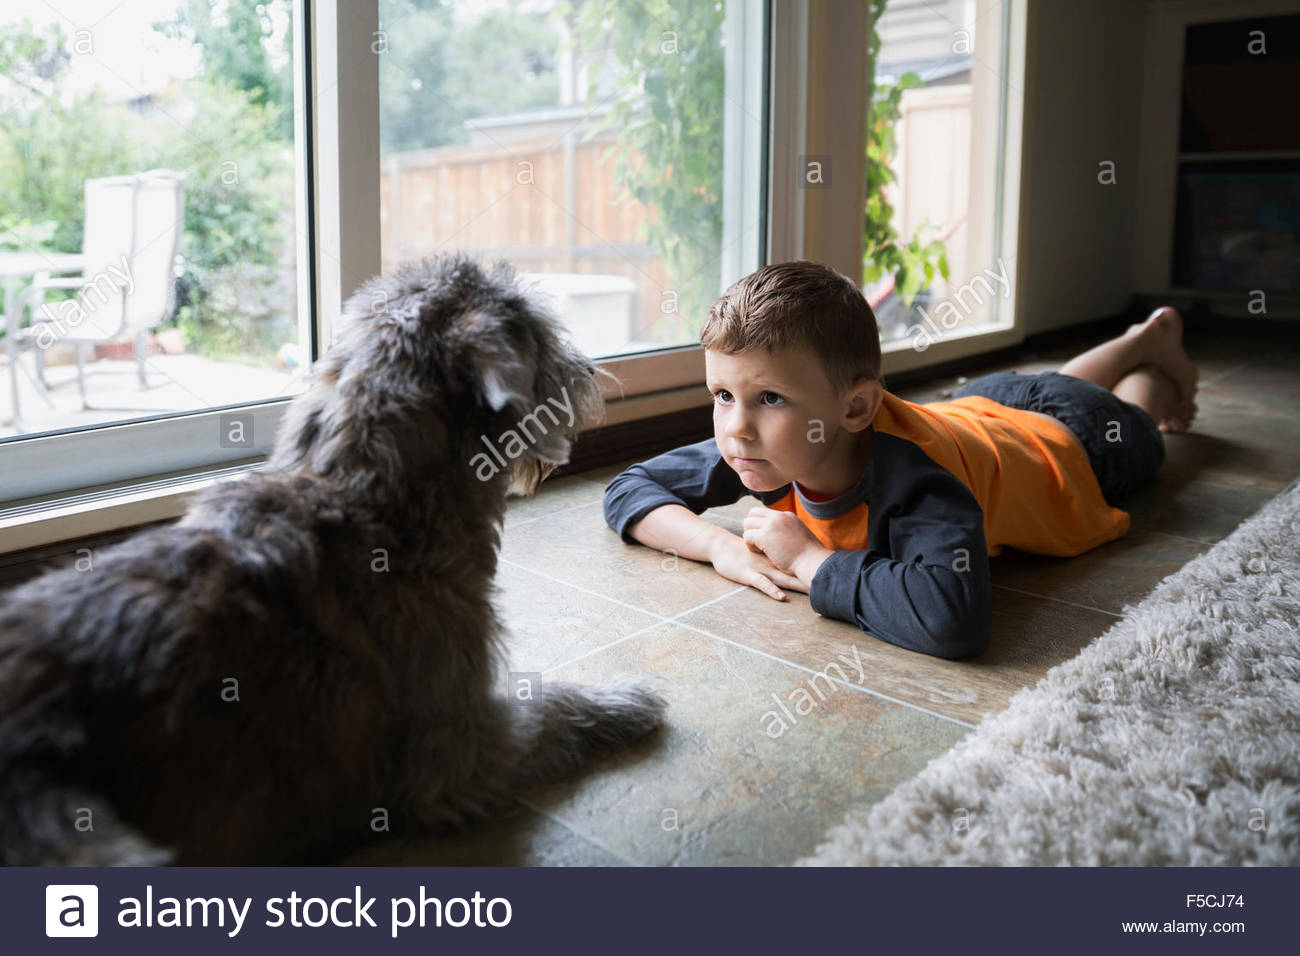 Serious boy staring at dog on floor Stock Photo